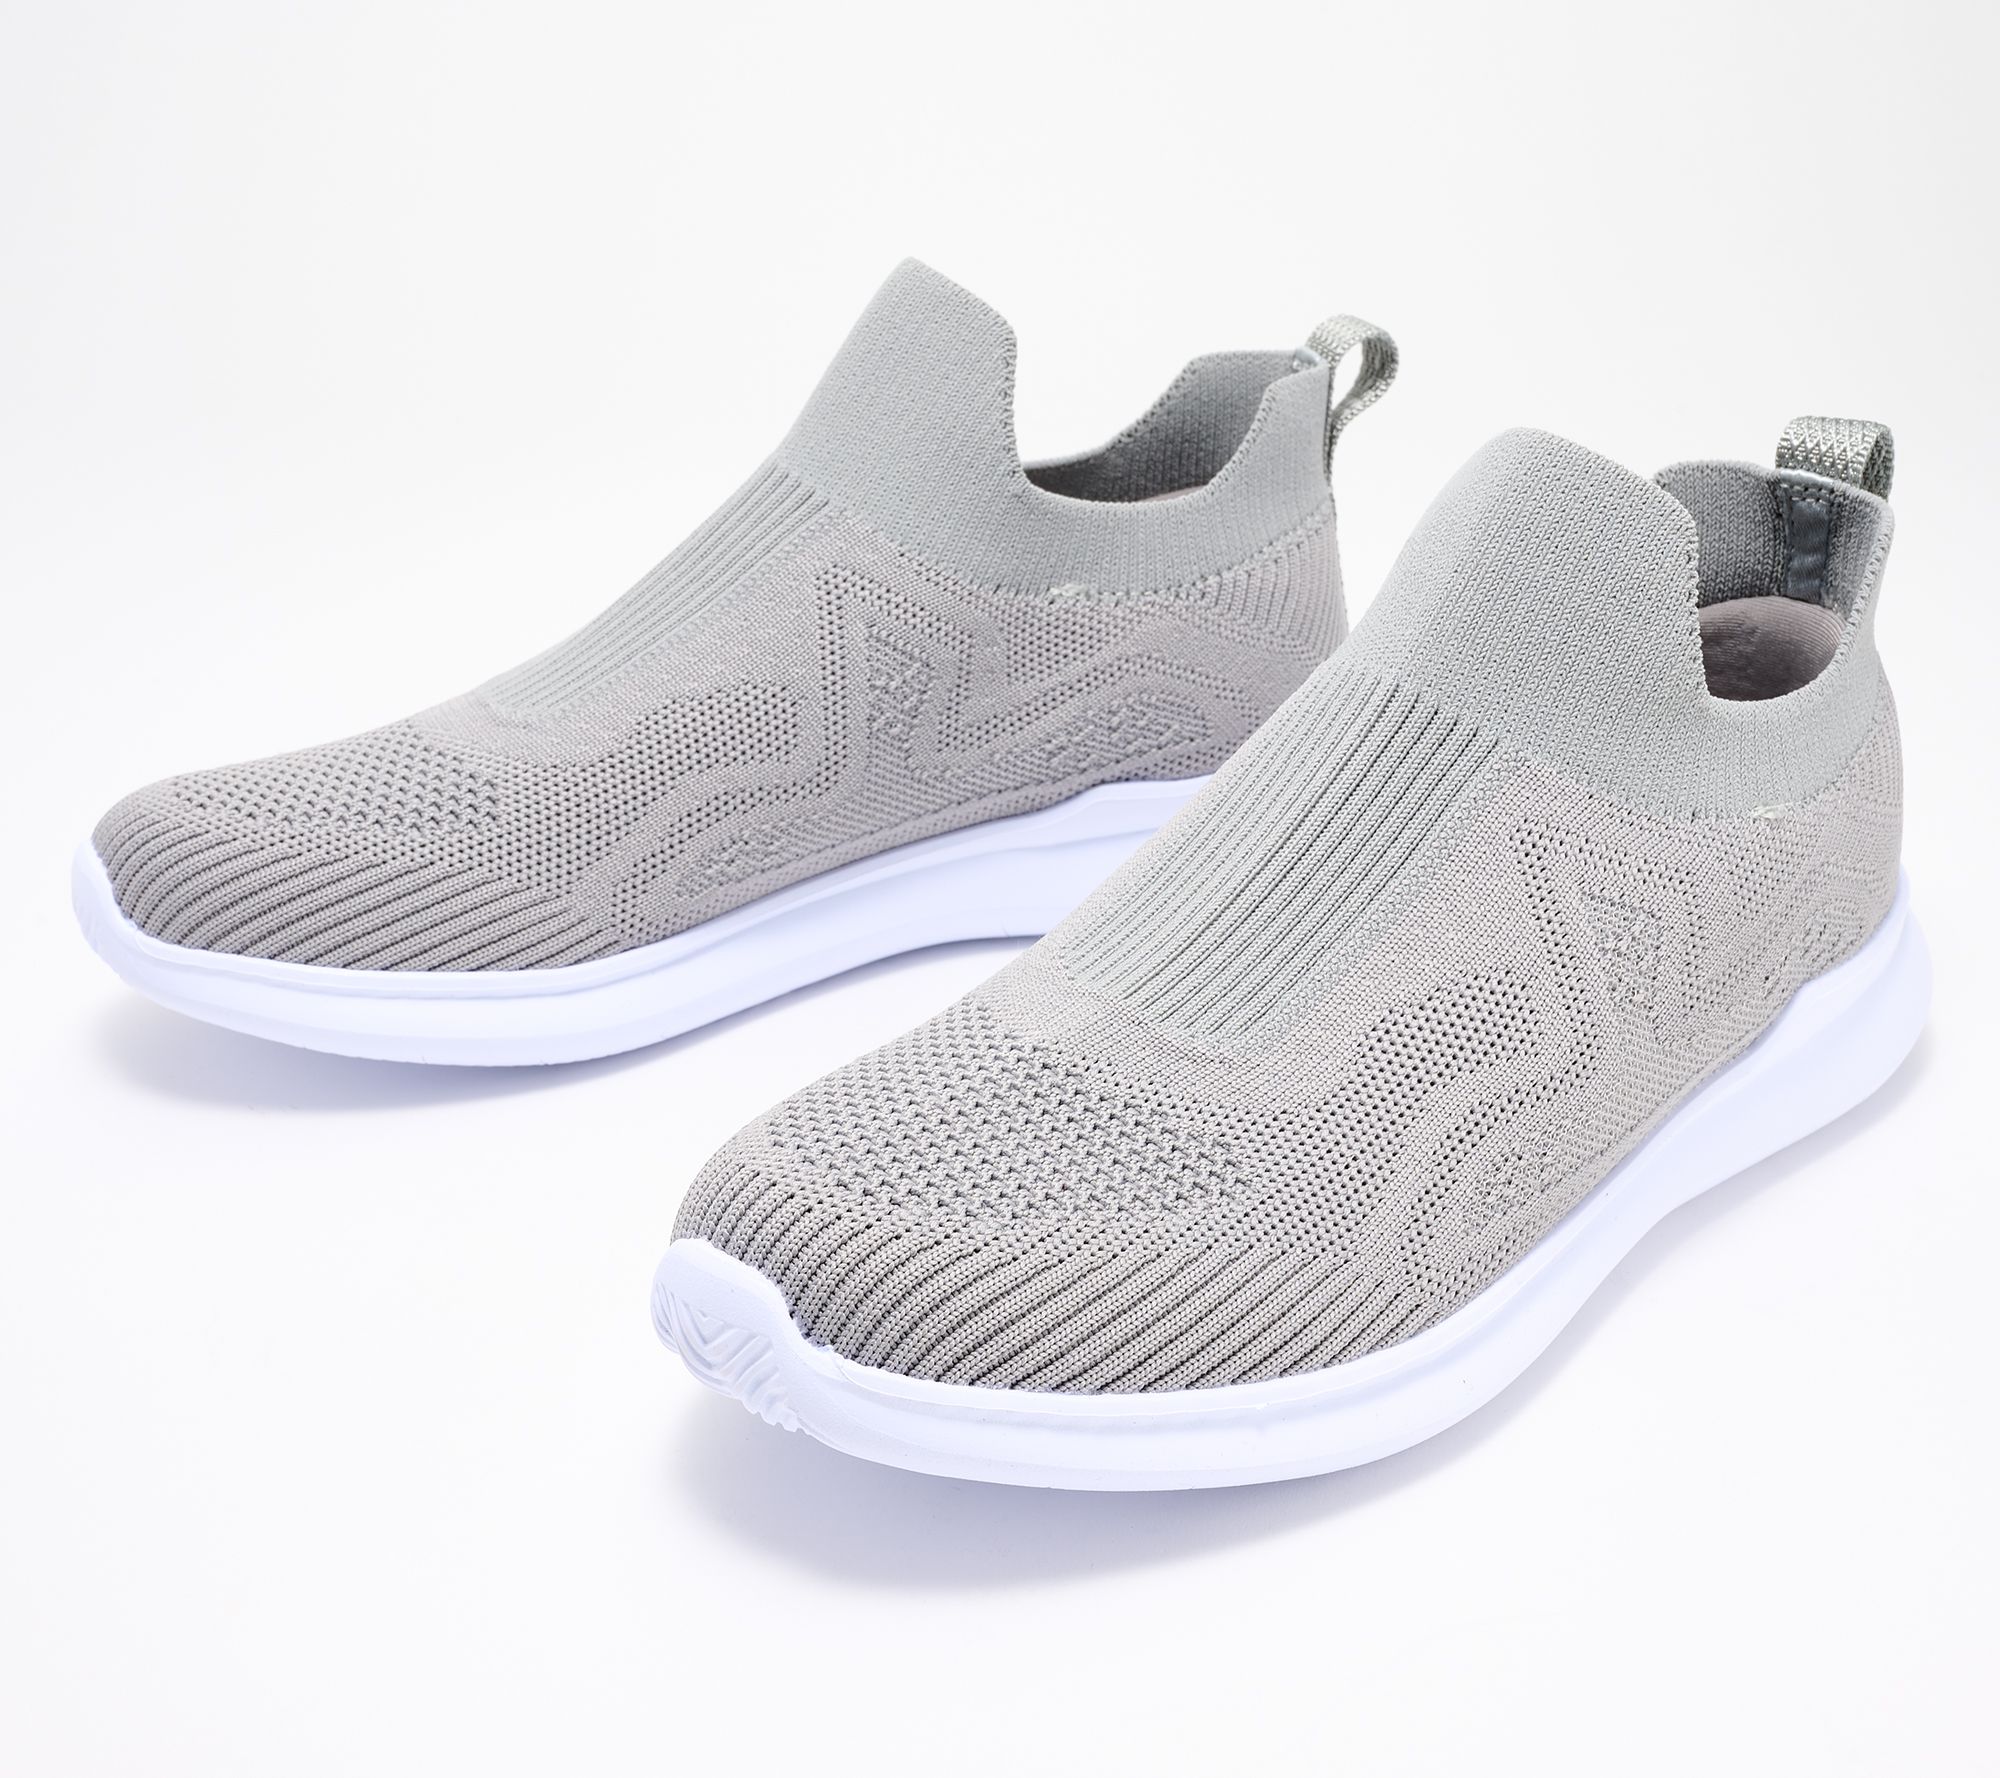 Propet Knit Slip-On Sneakers - TravelBound Slip-On - QVC.com